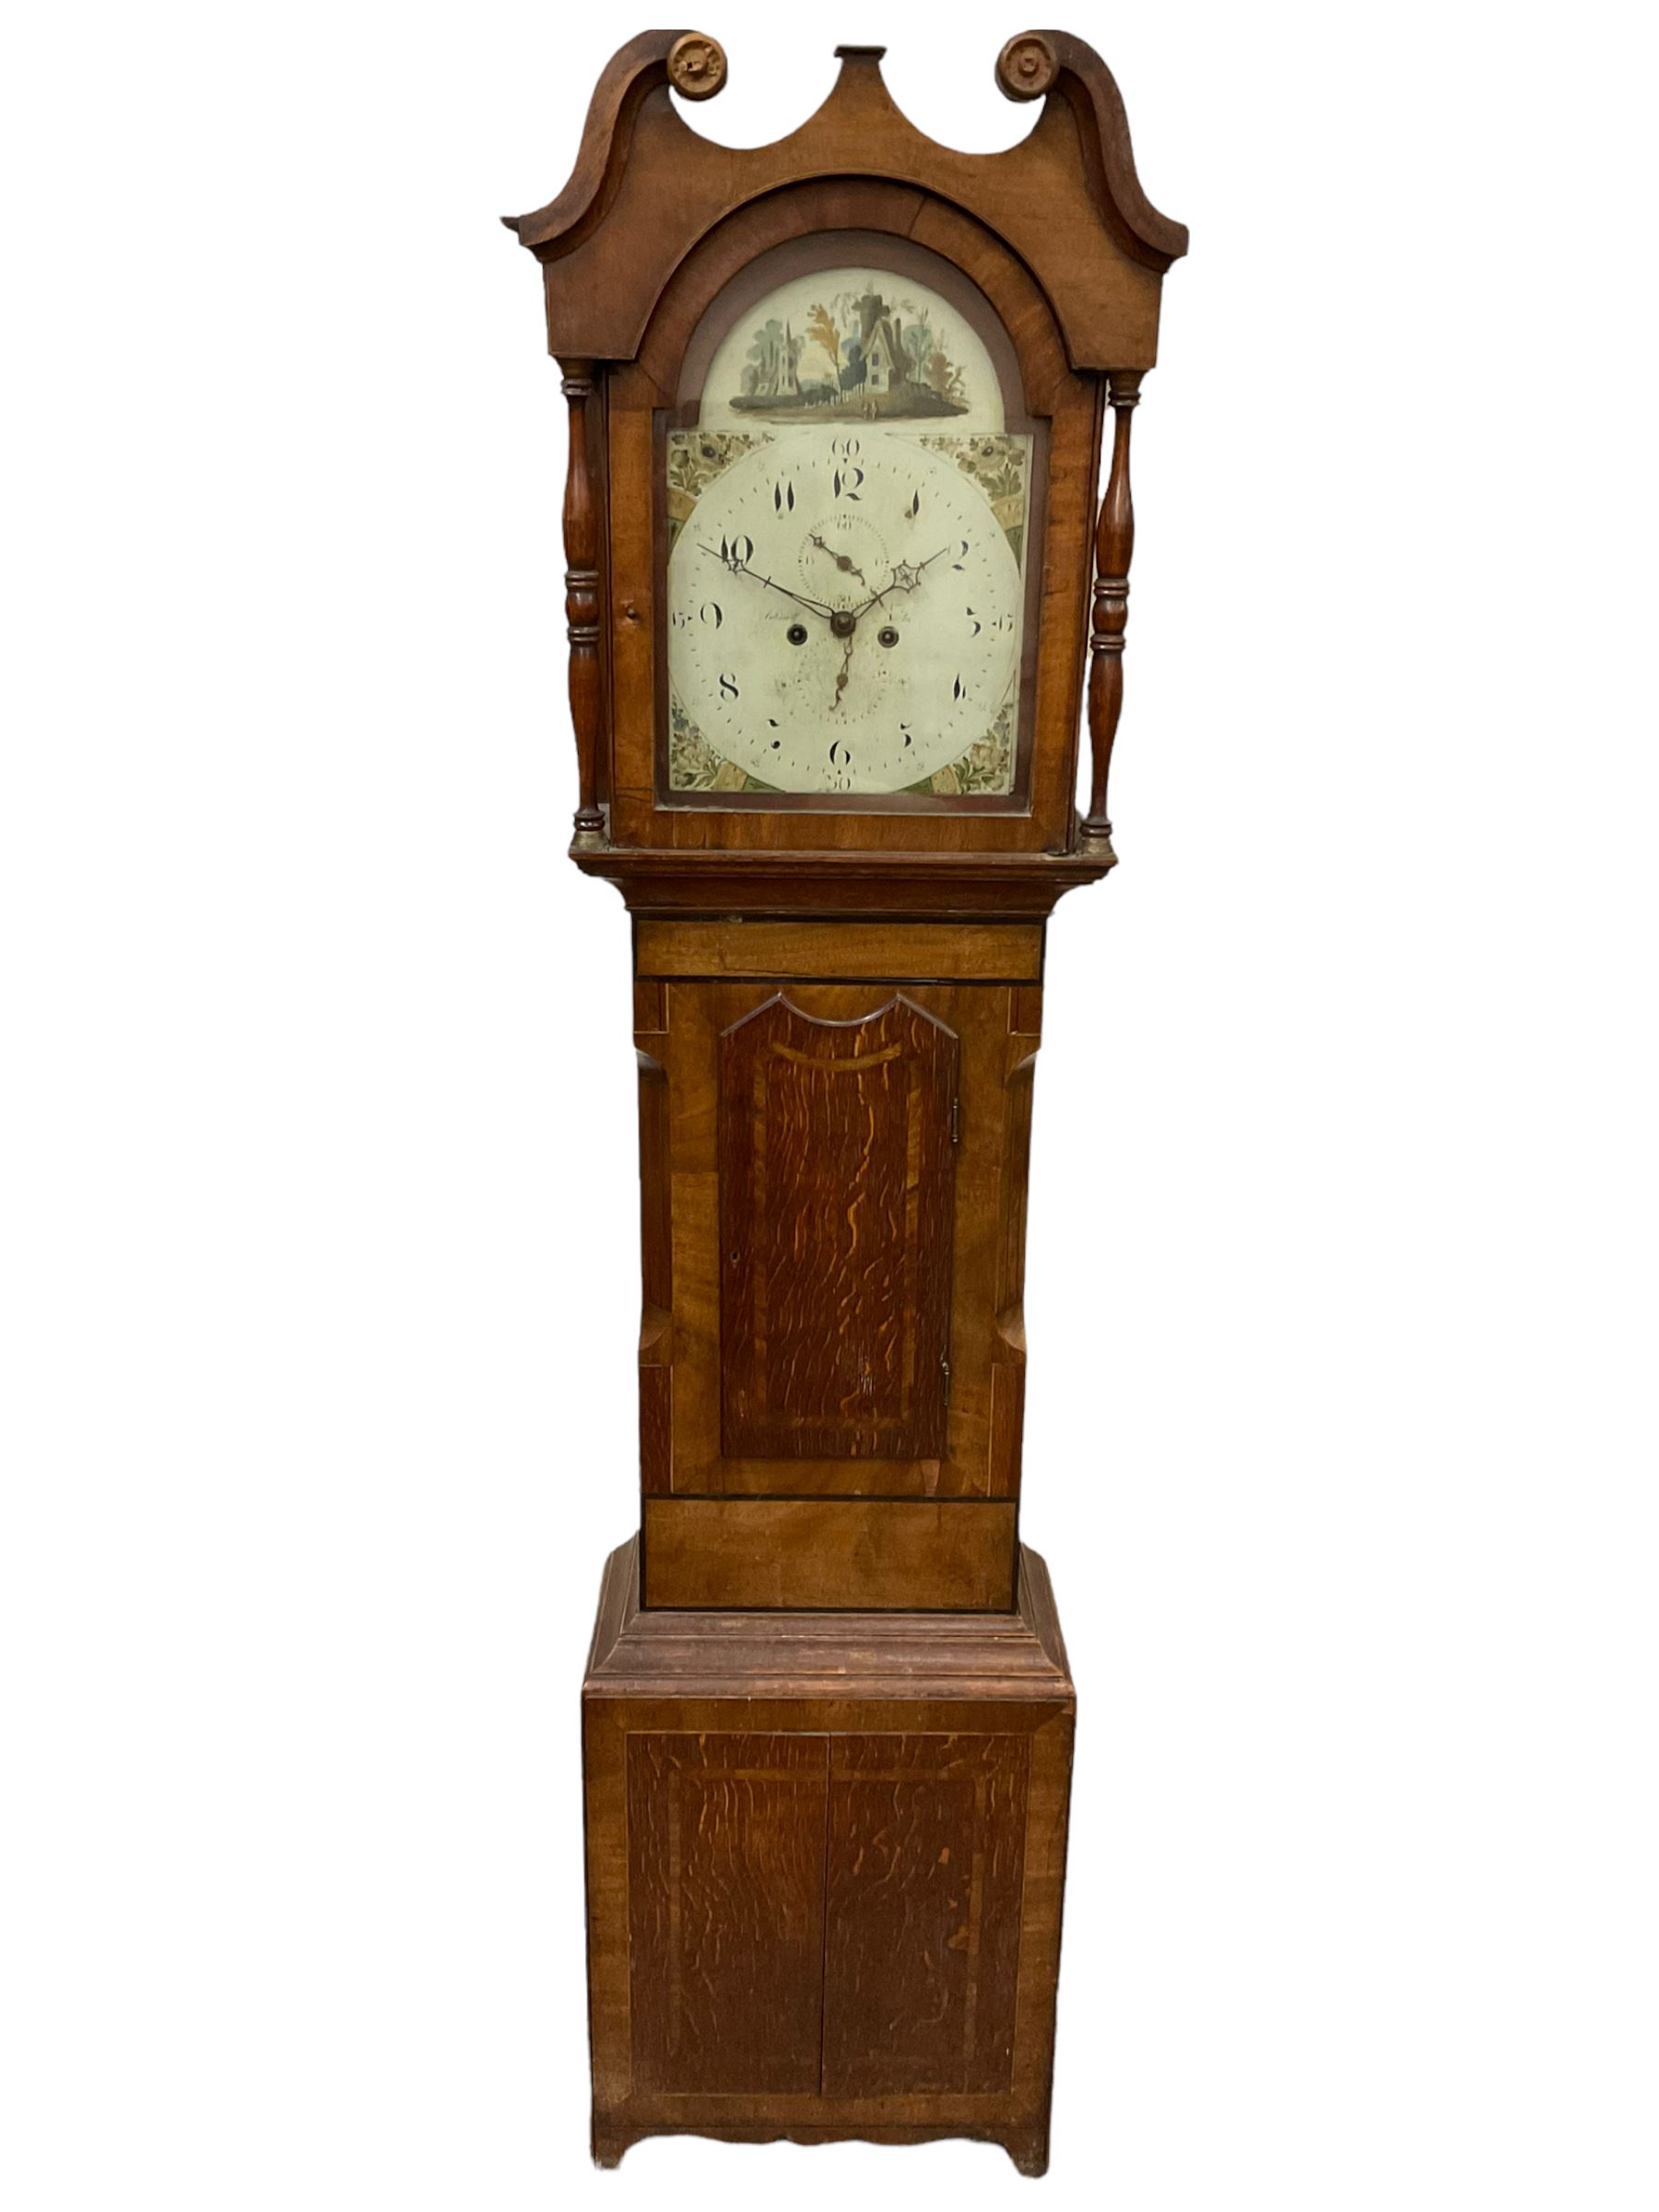 An Oak and Mahogany longcase clock with a Swans neck pediment and break arch hood door flanked by tw - Image 3 of 5